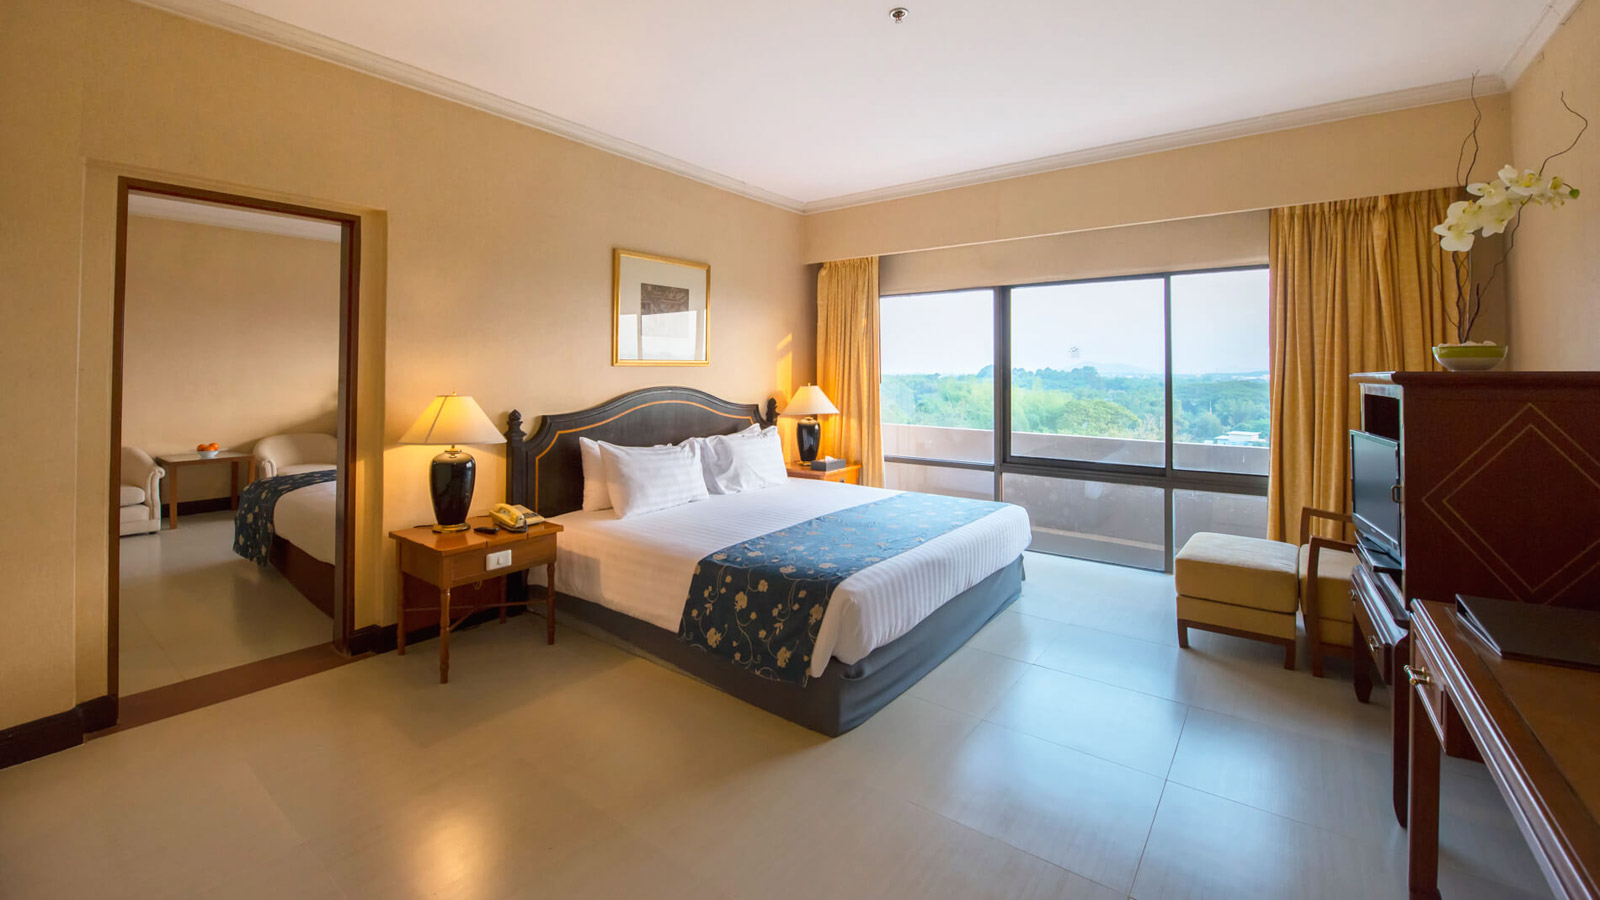 Junior Family Suites at Loei Palace Hotel